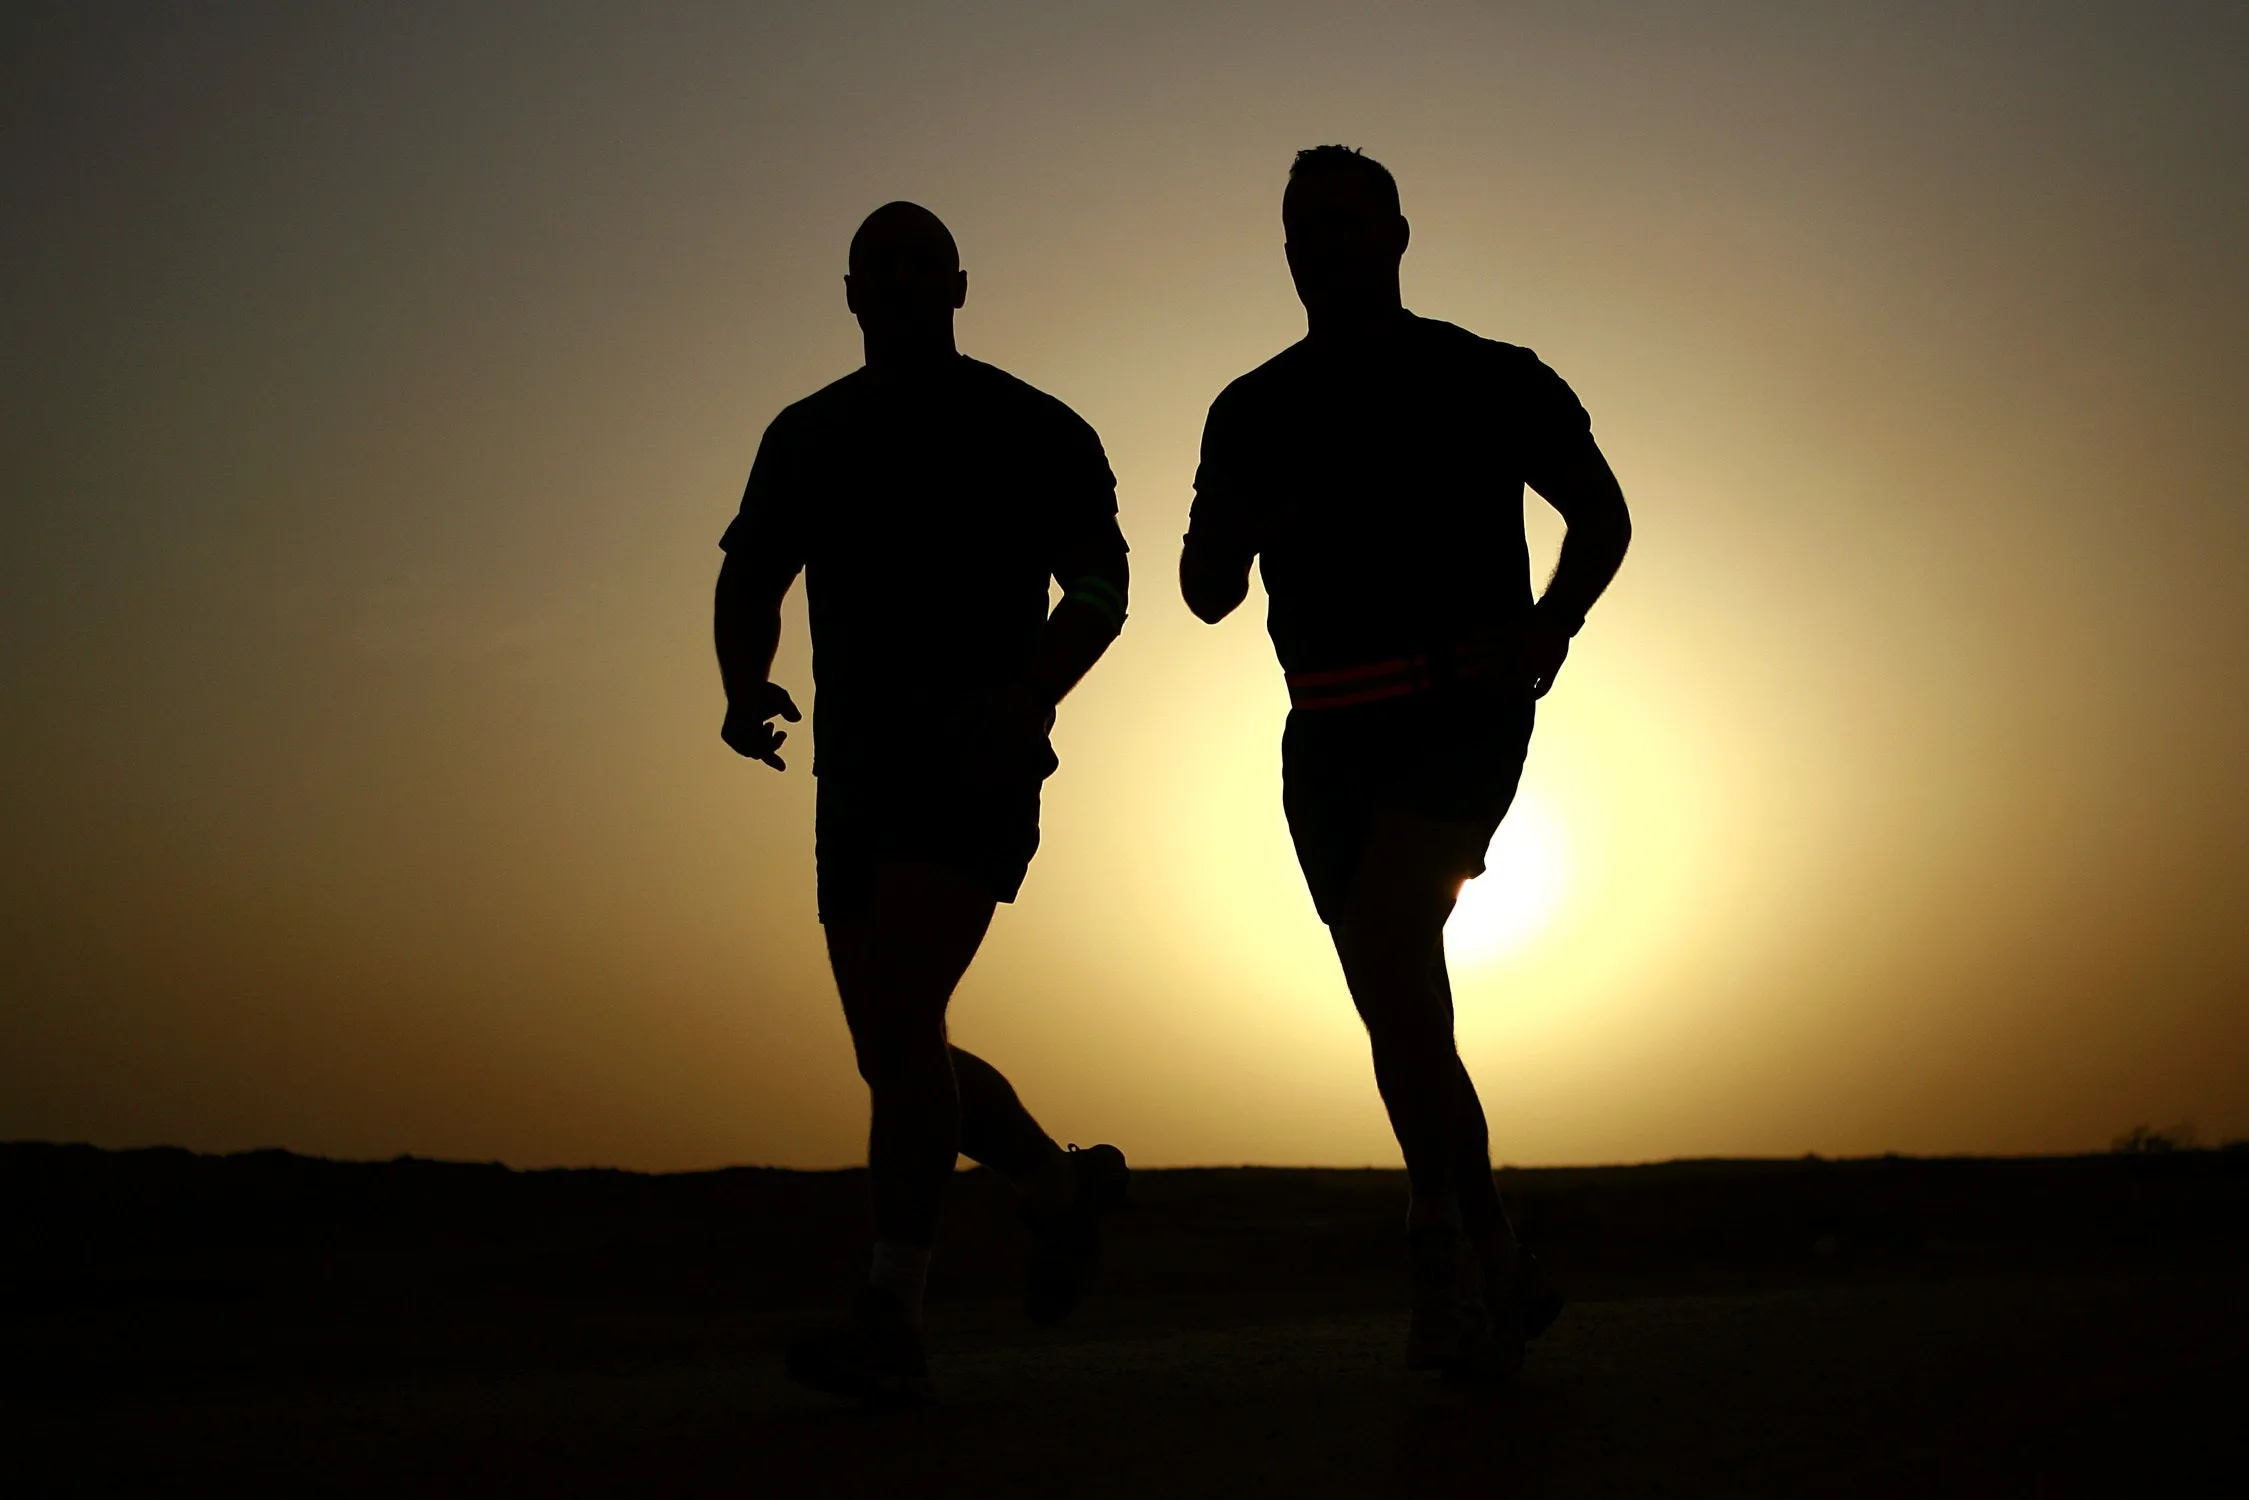 A silhouette shot of two men jogging before sunset